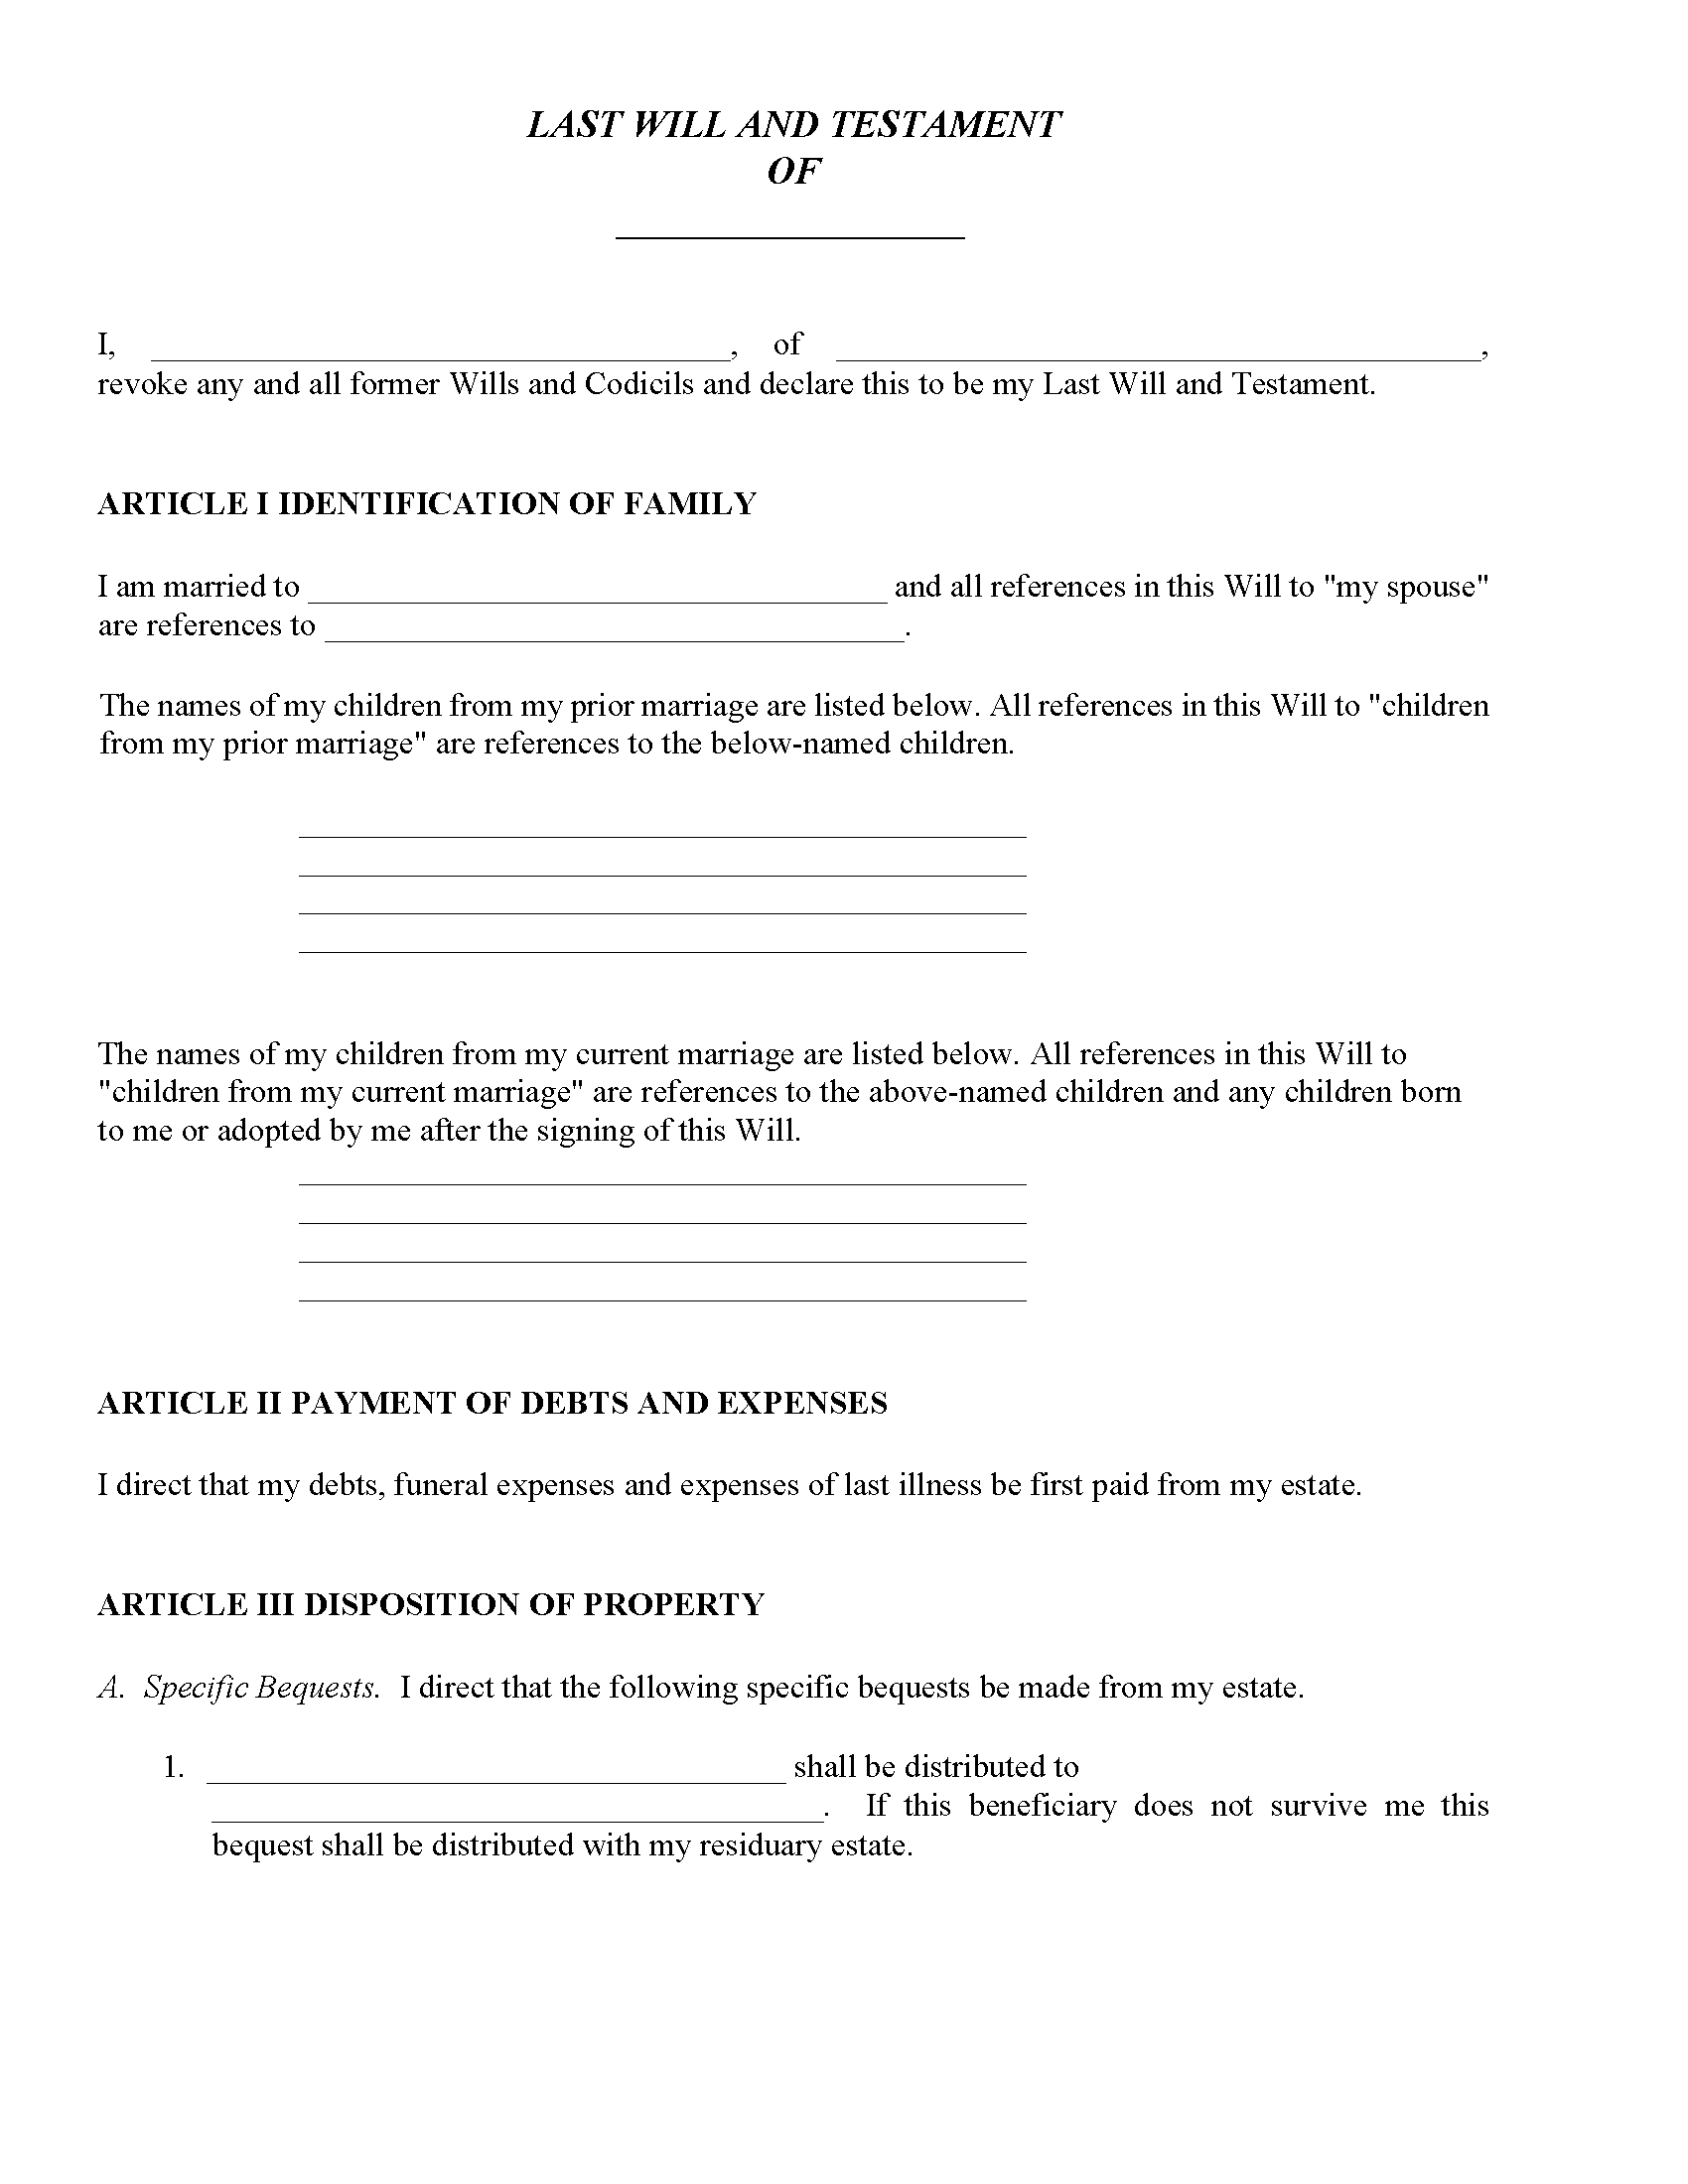 michigan-will-for-remarried-with-children-free-printable-legal-forms